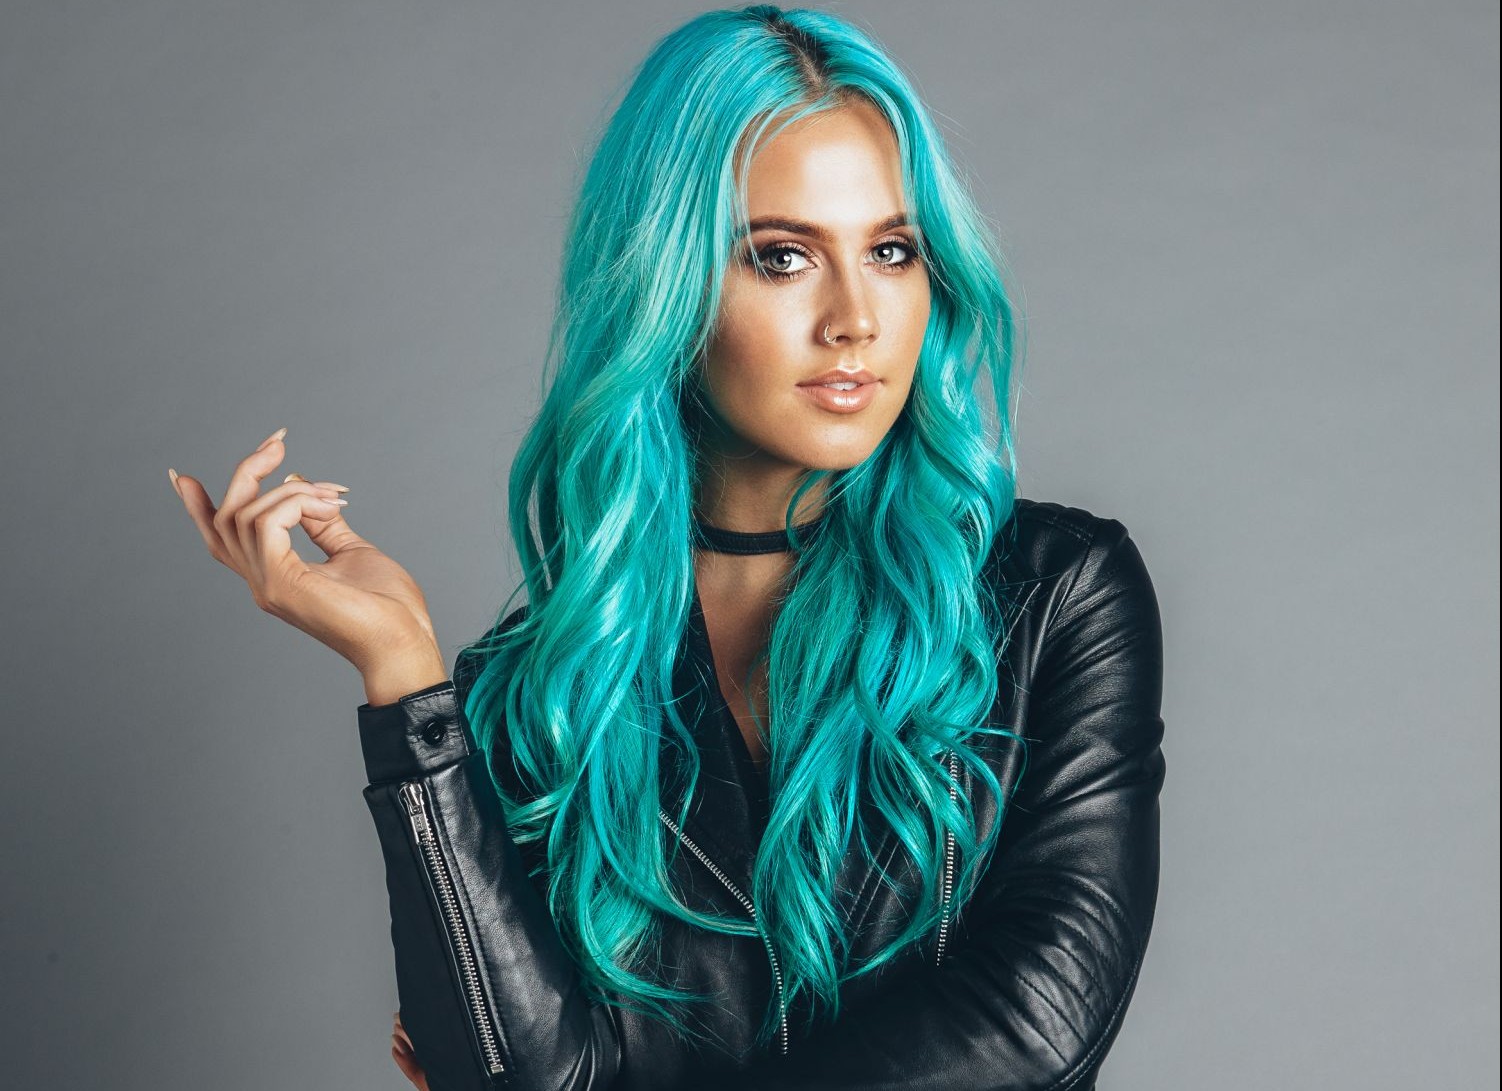 INTERVIEW DJ Tigerlily chats music & life on tour